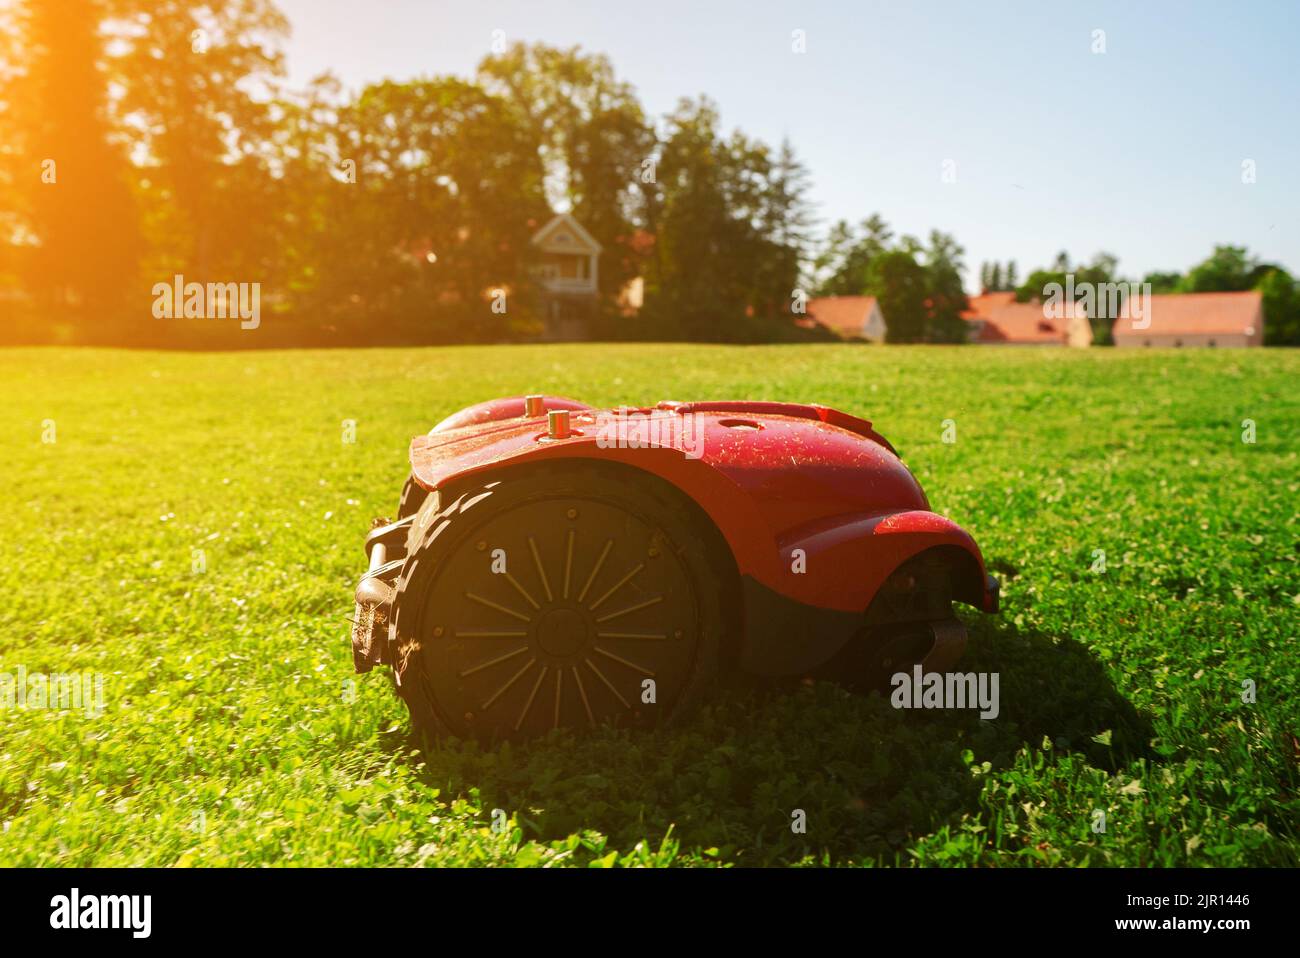 Red robotic lawn mower mows the grass on the lawn. Stock Photo